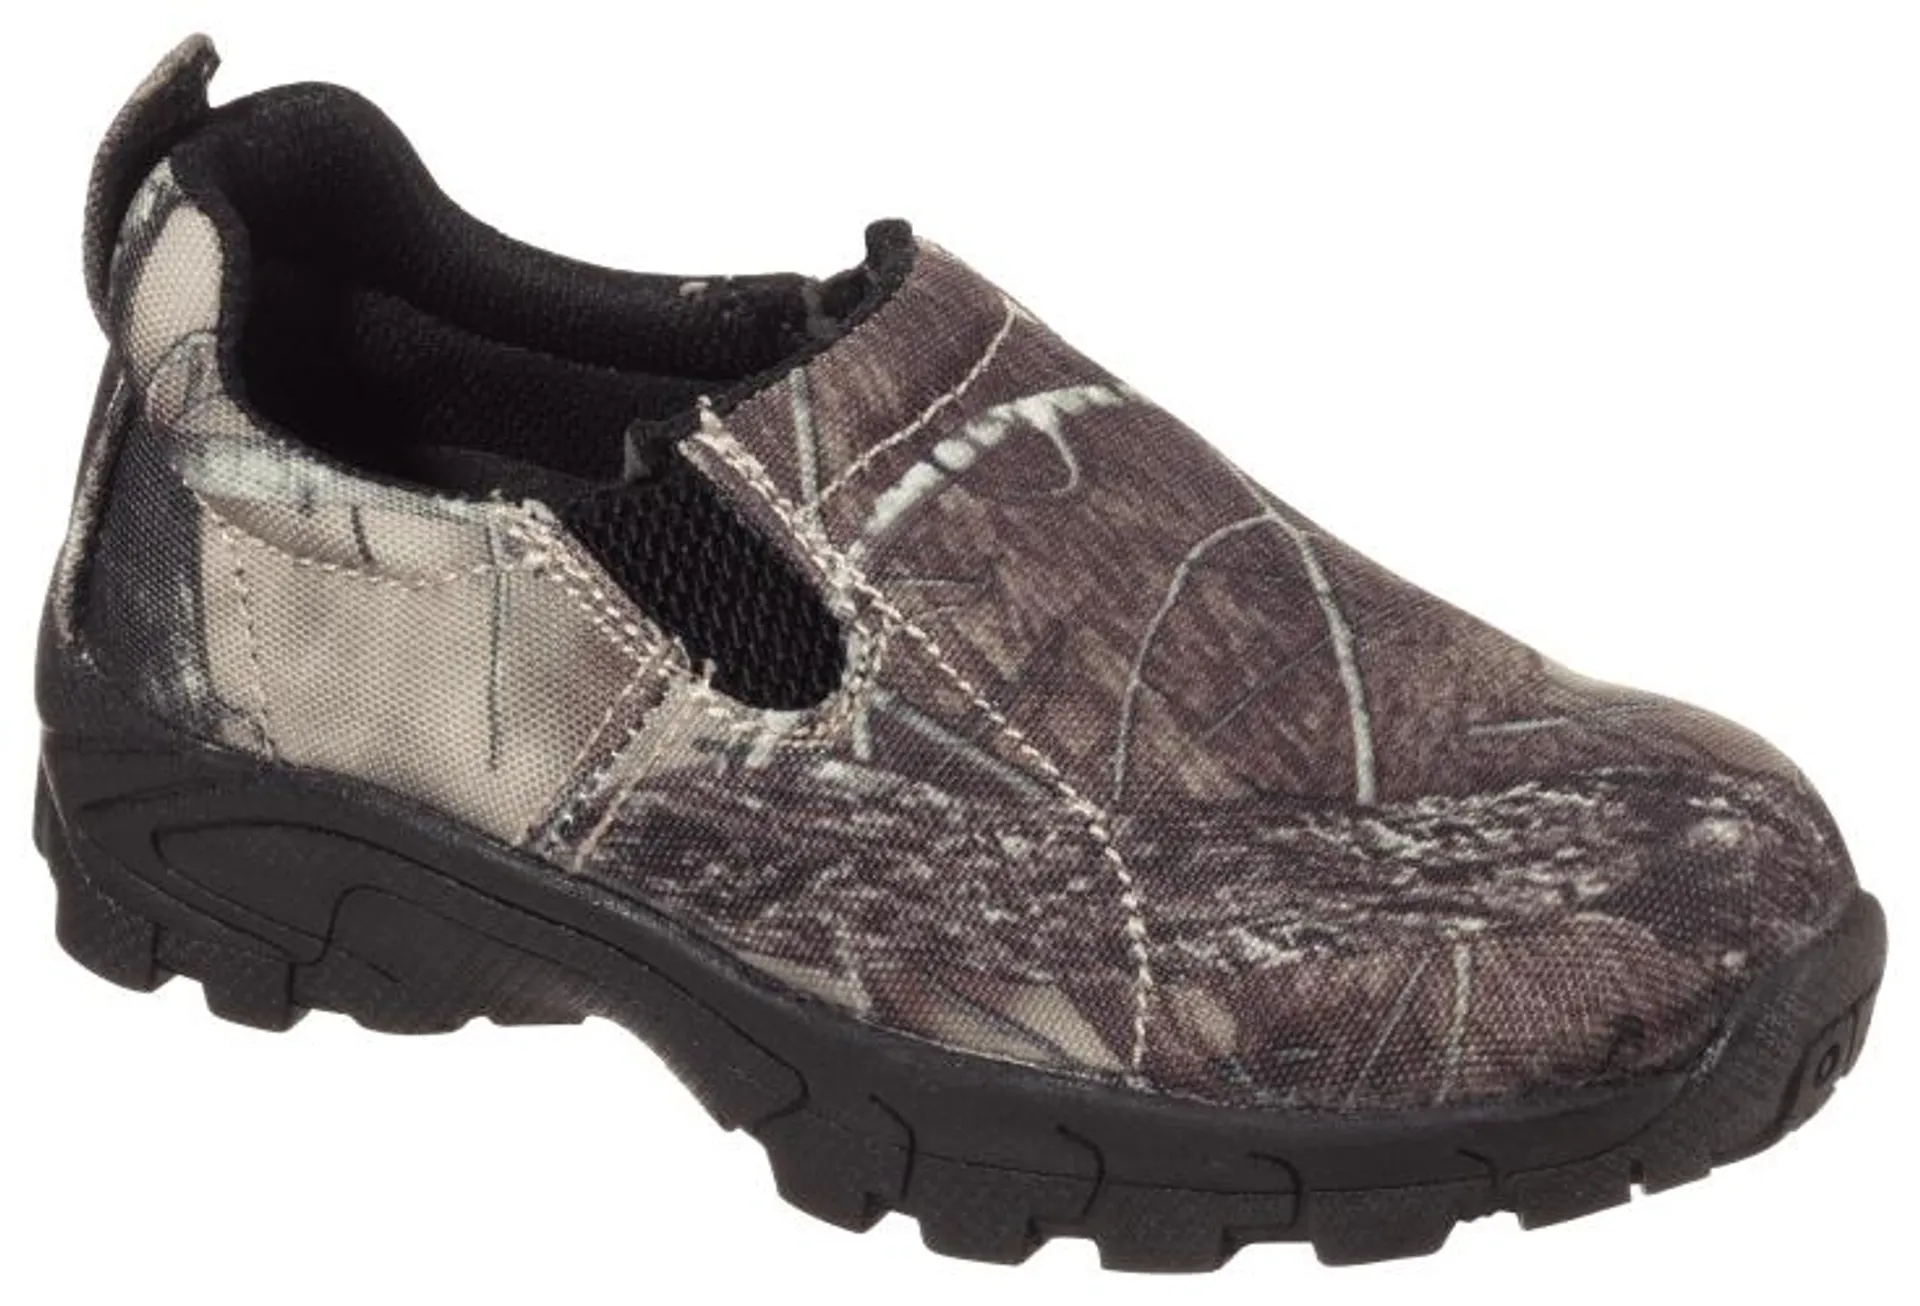 RedHead XTR Camo Moc Slip-On Shoes for Toddlers or Kids